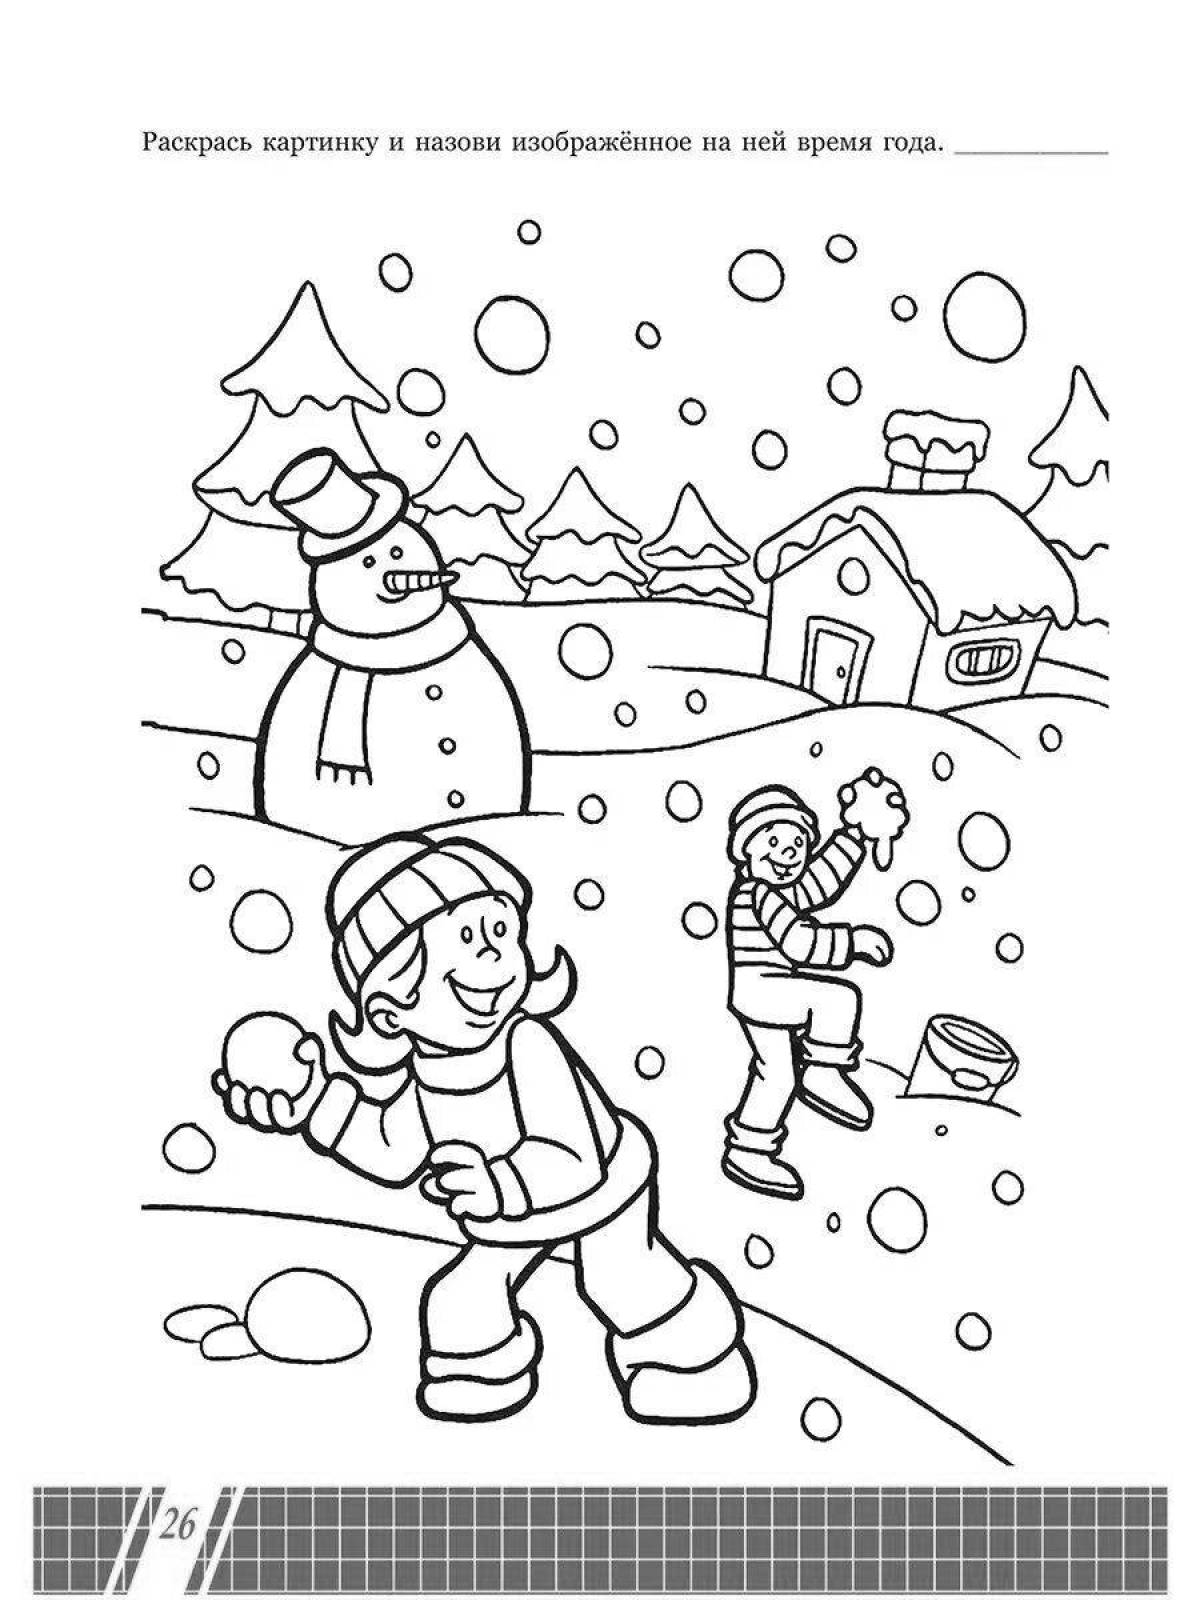 Fantastic winter coloring book for children 4 years old